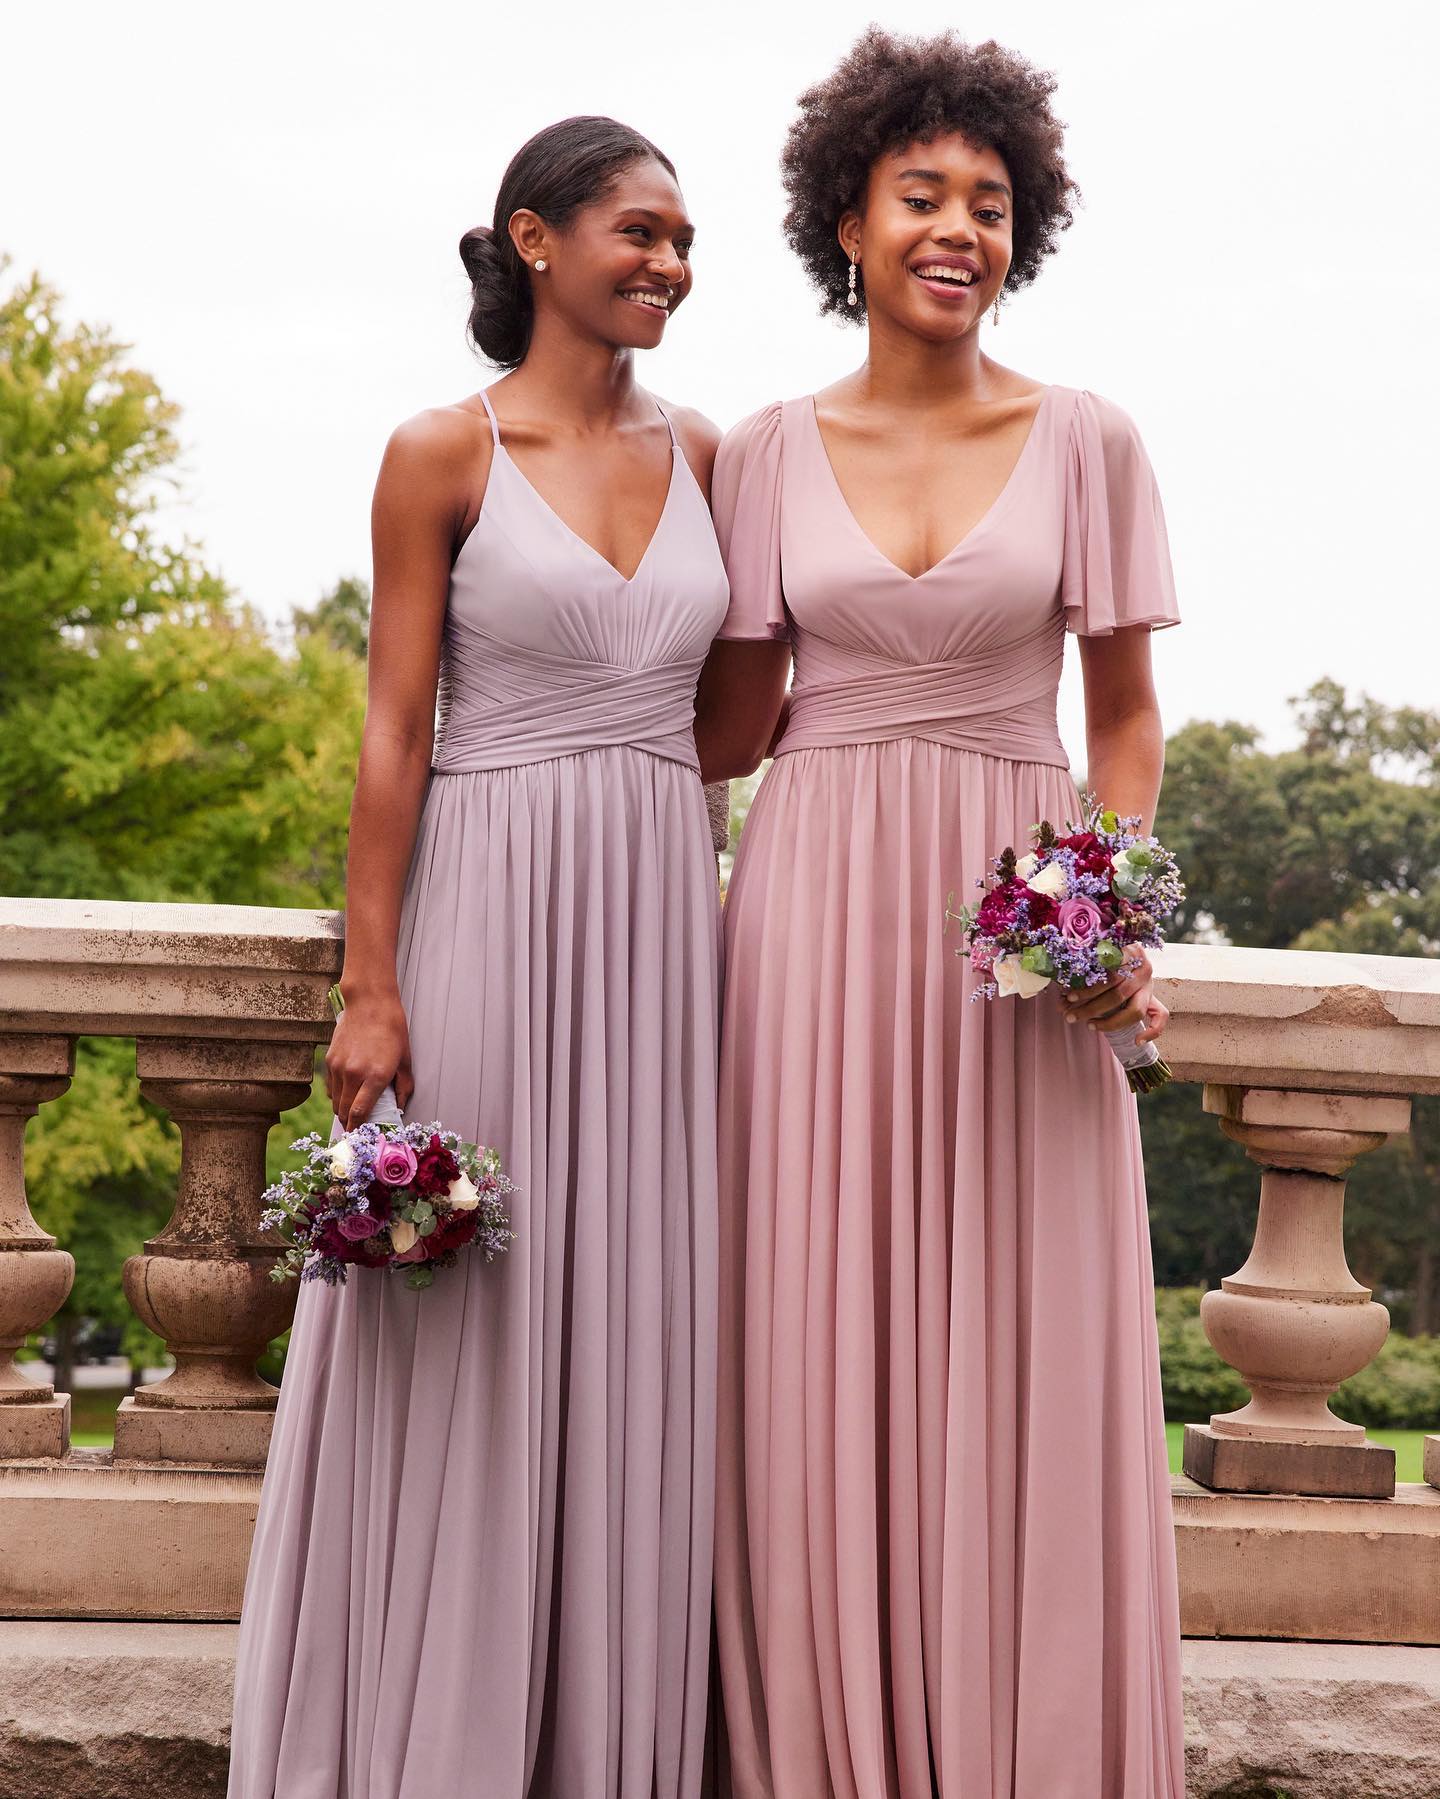 2019 Weddings: Bridesmaid Dresses Bellwether Events Bridesmaid Gowns